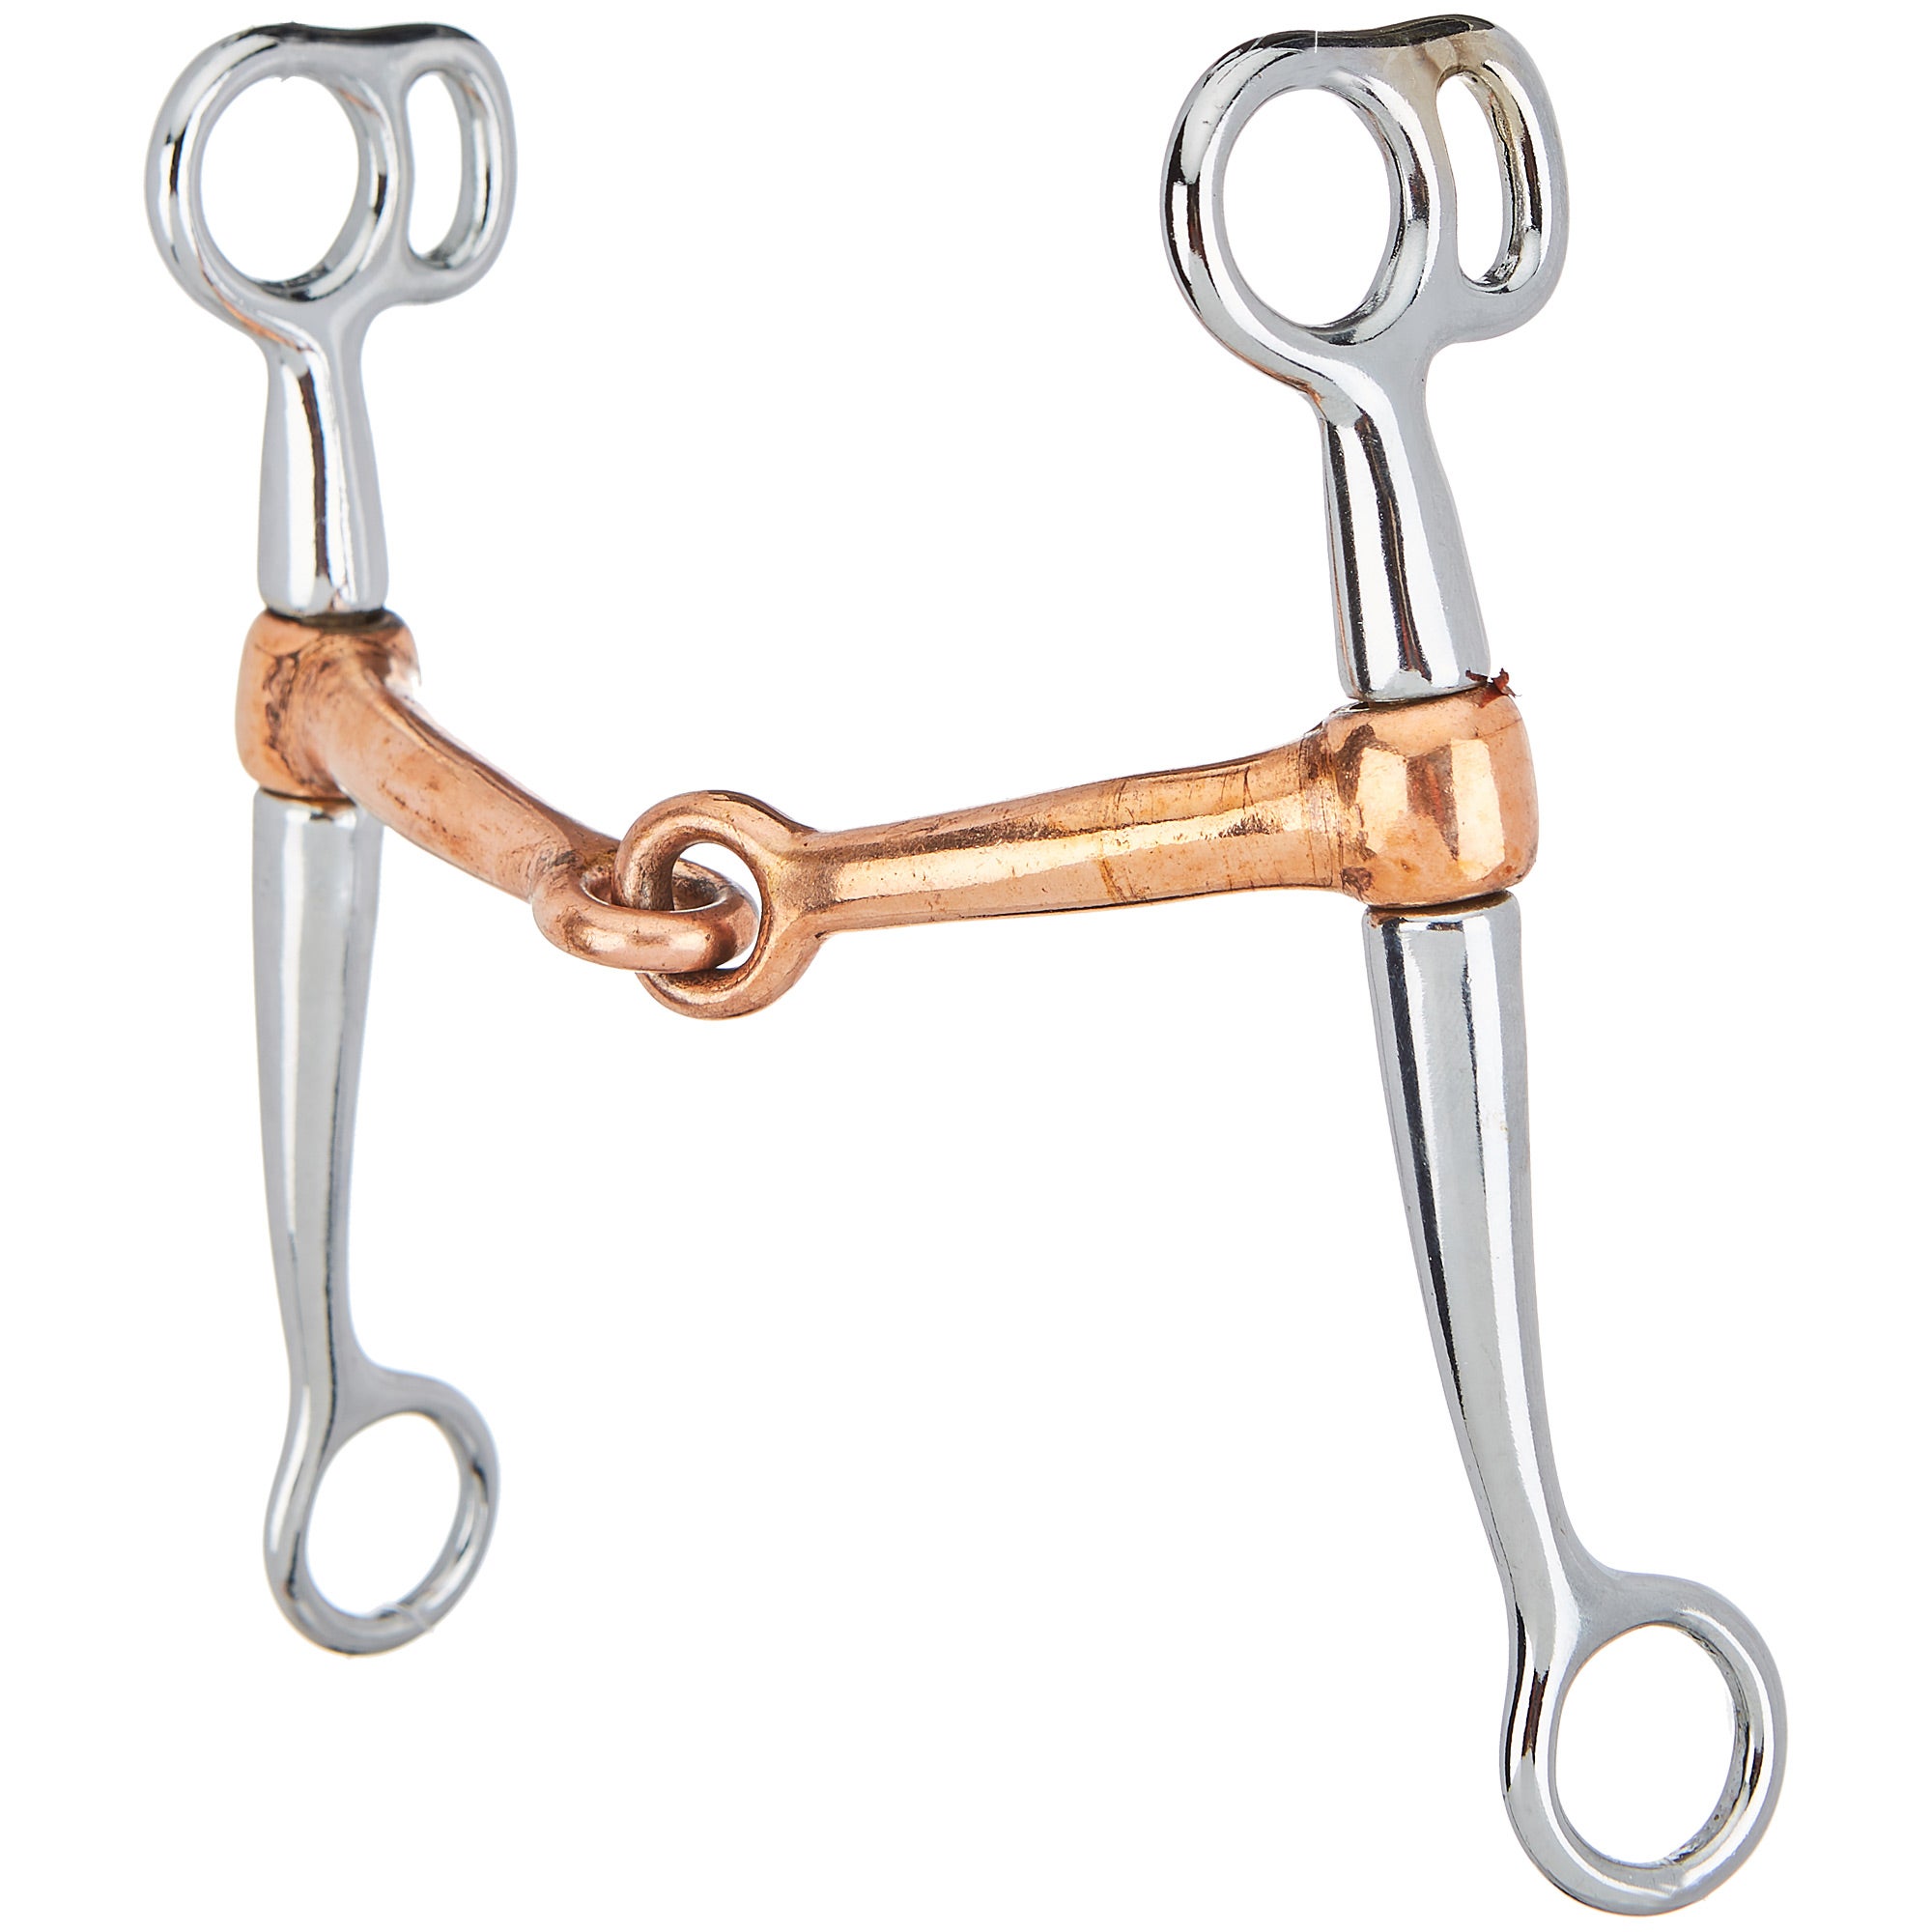 Weaver Draft Horse Bit Tom Thumb Snaffle Mouth with 8" Cheeks 6-1/2" 